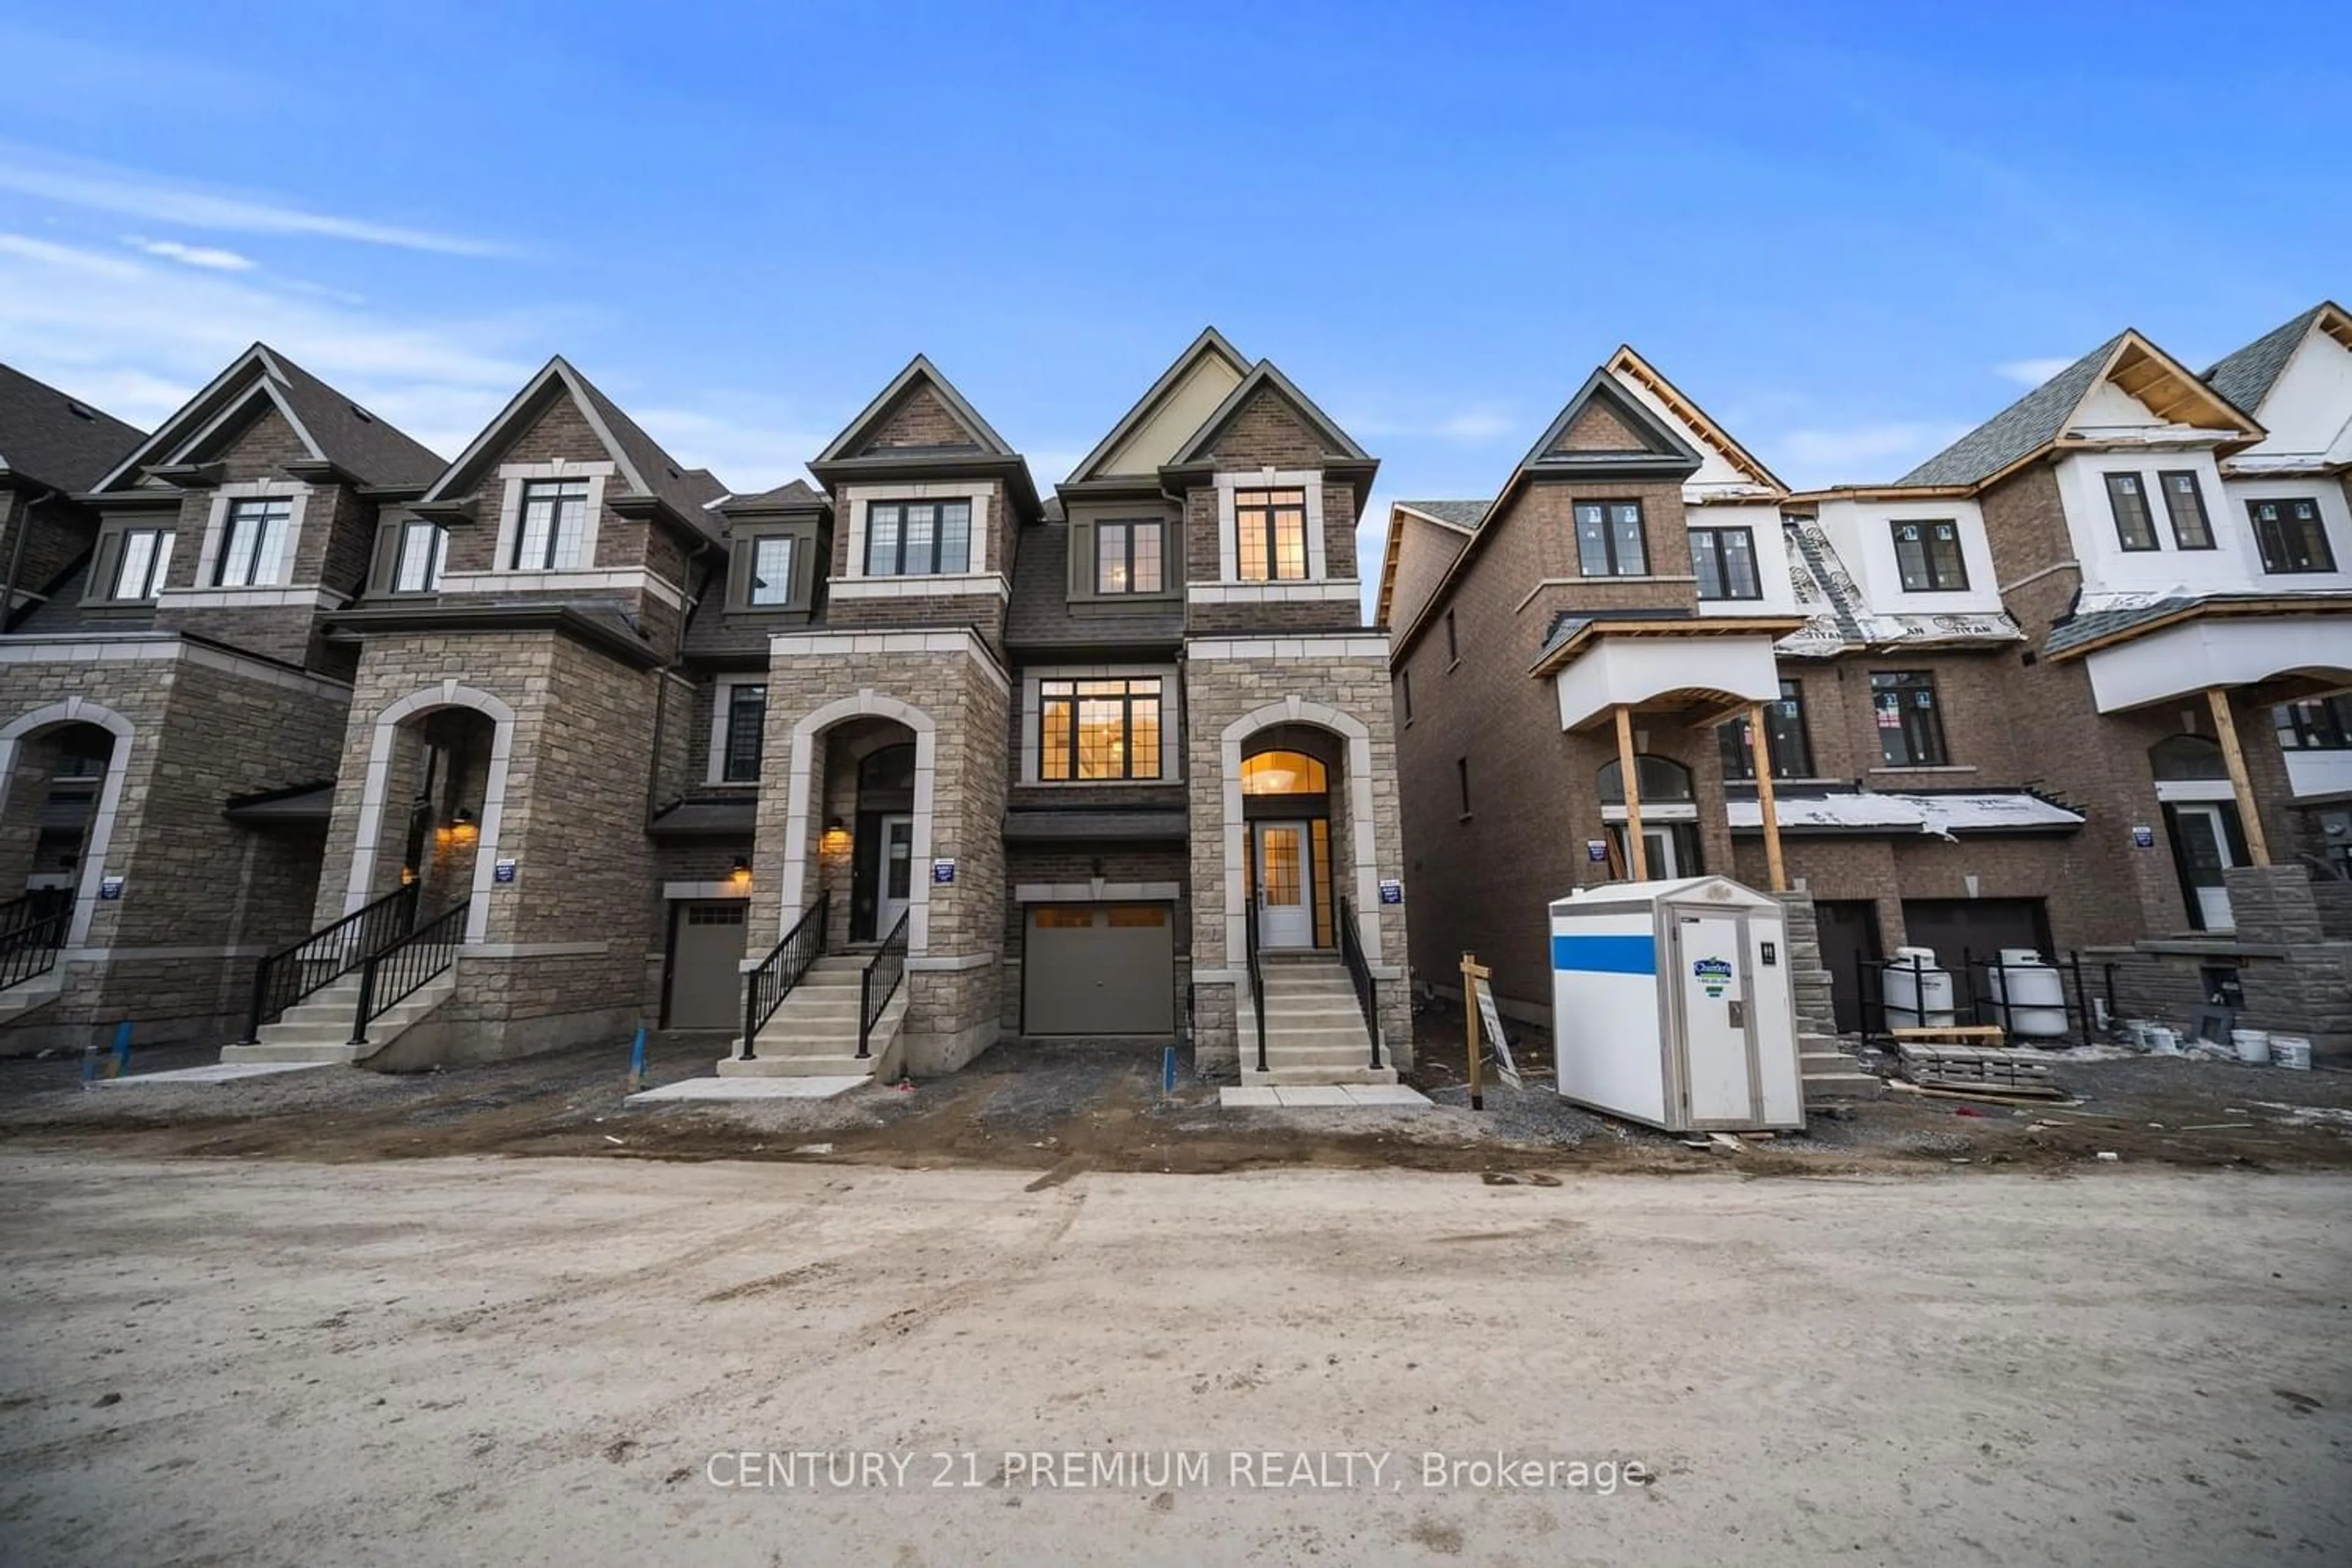 Home with stone exterior material for 16 Calloway Way, Whitby Ontario L1N 3W8